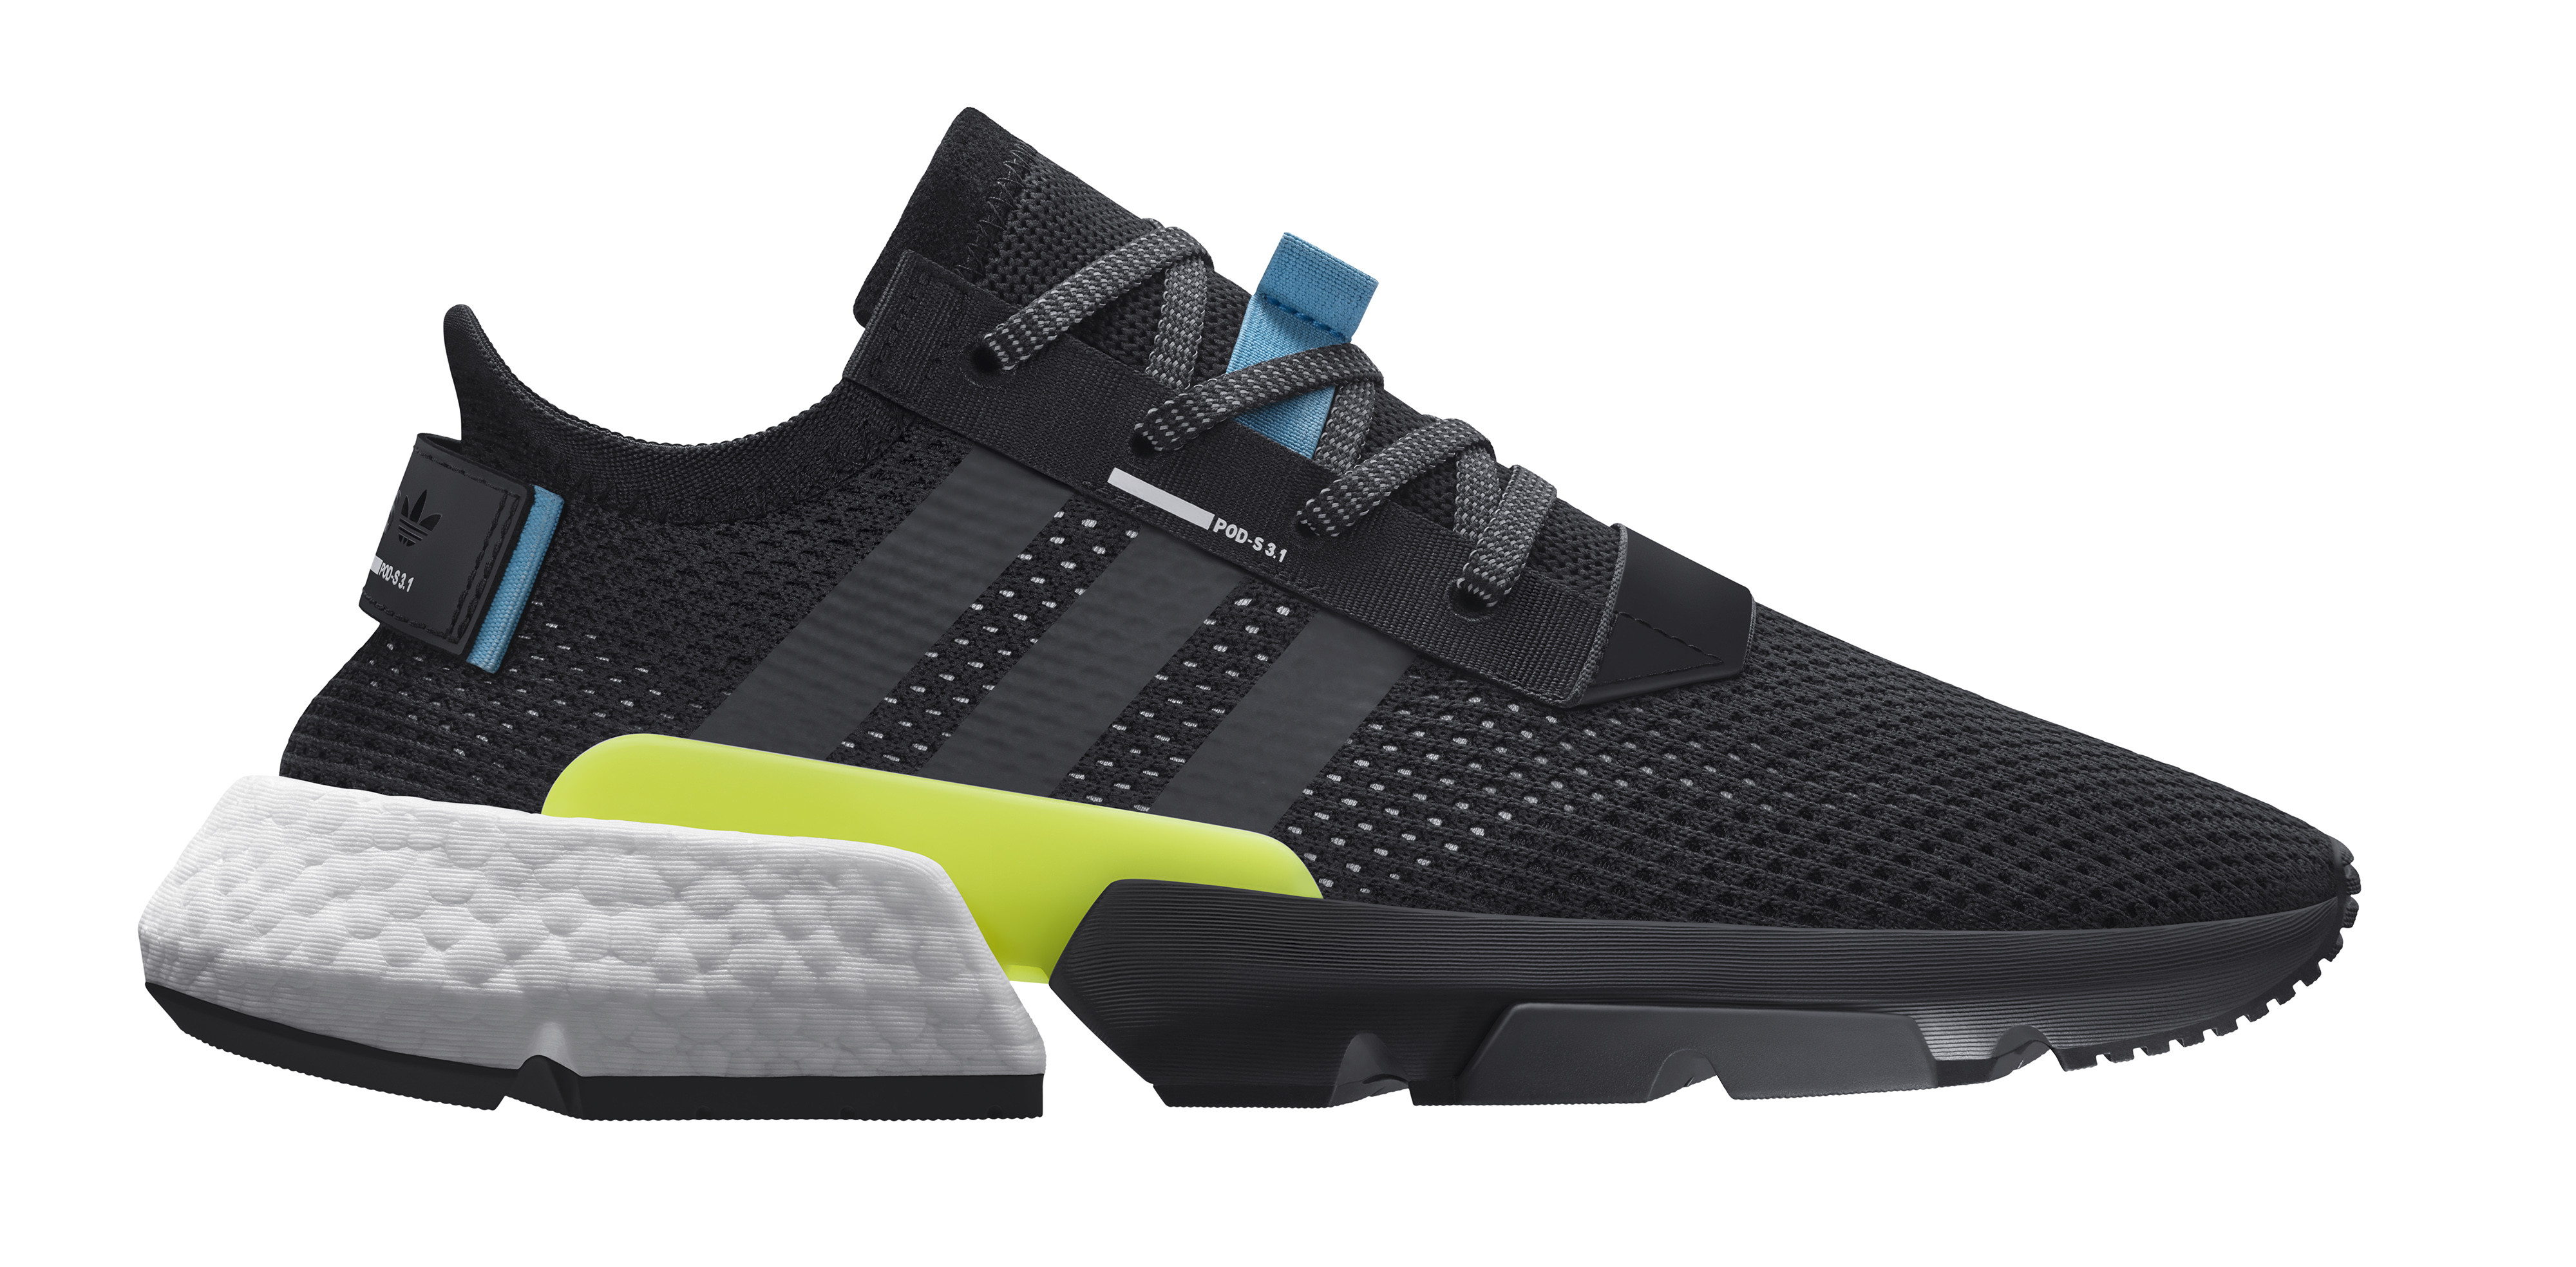 Adidas P.O.D. System AQ1059 (Lateral)